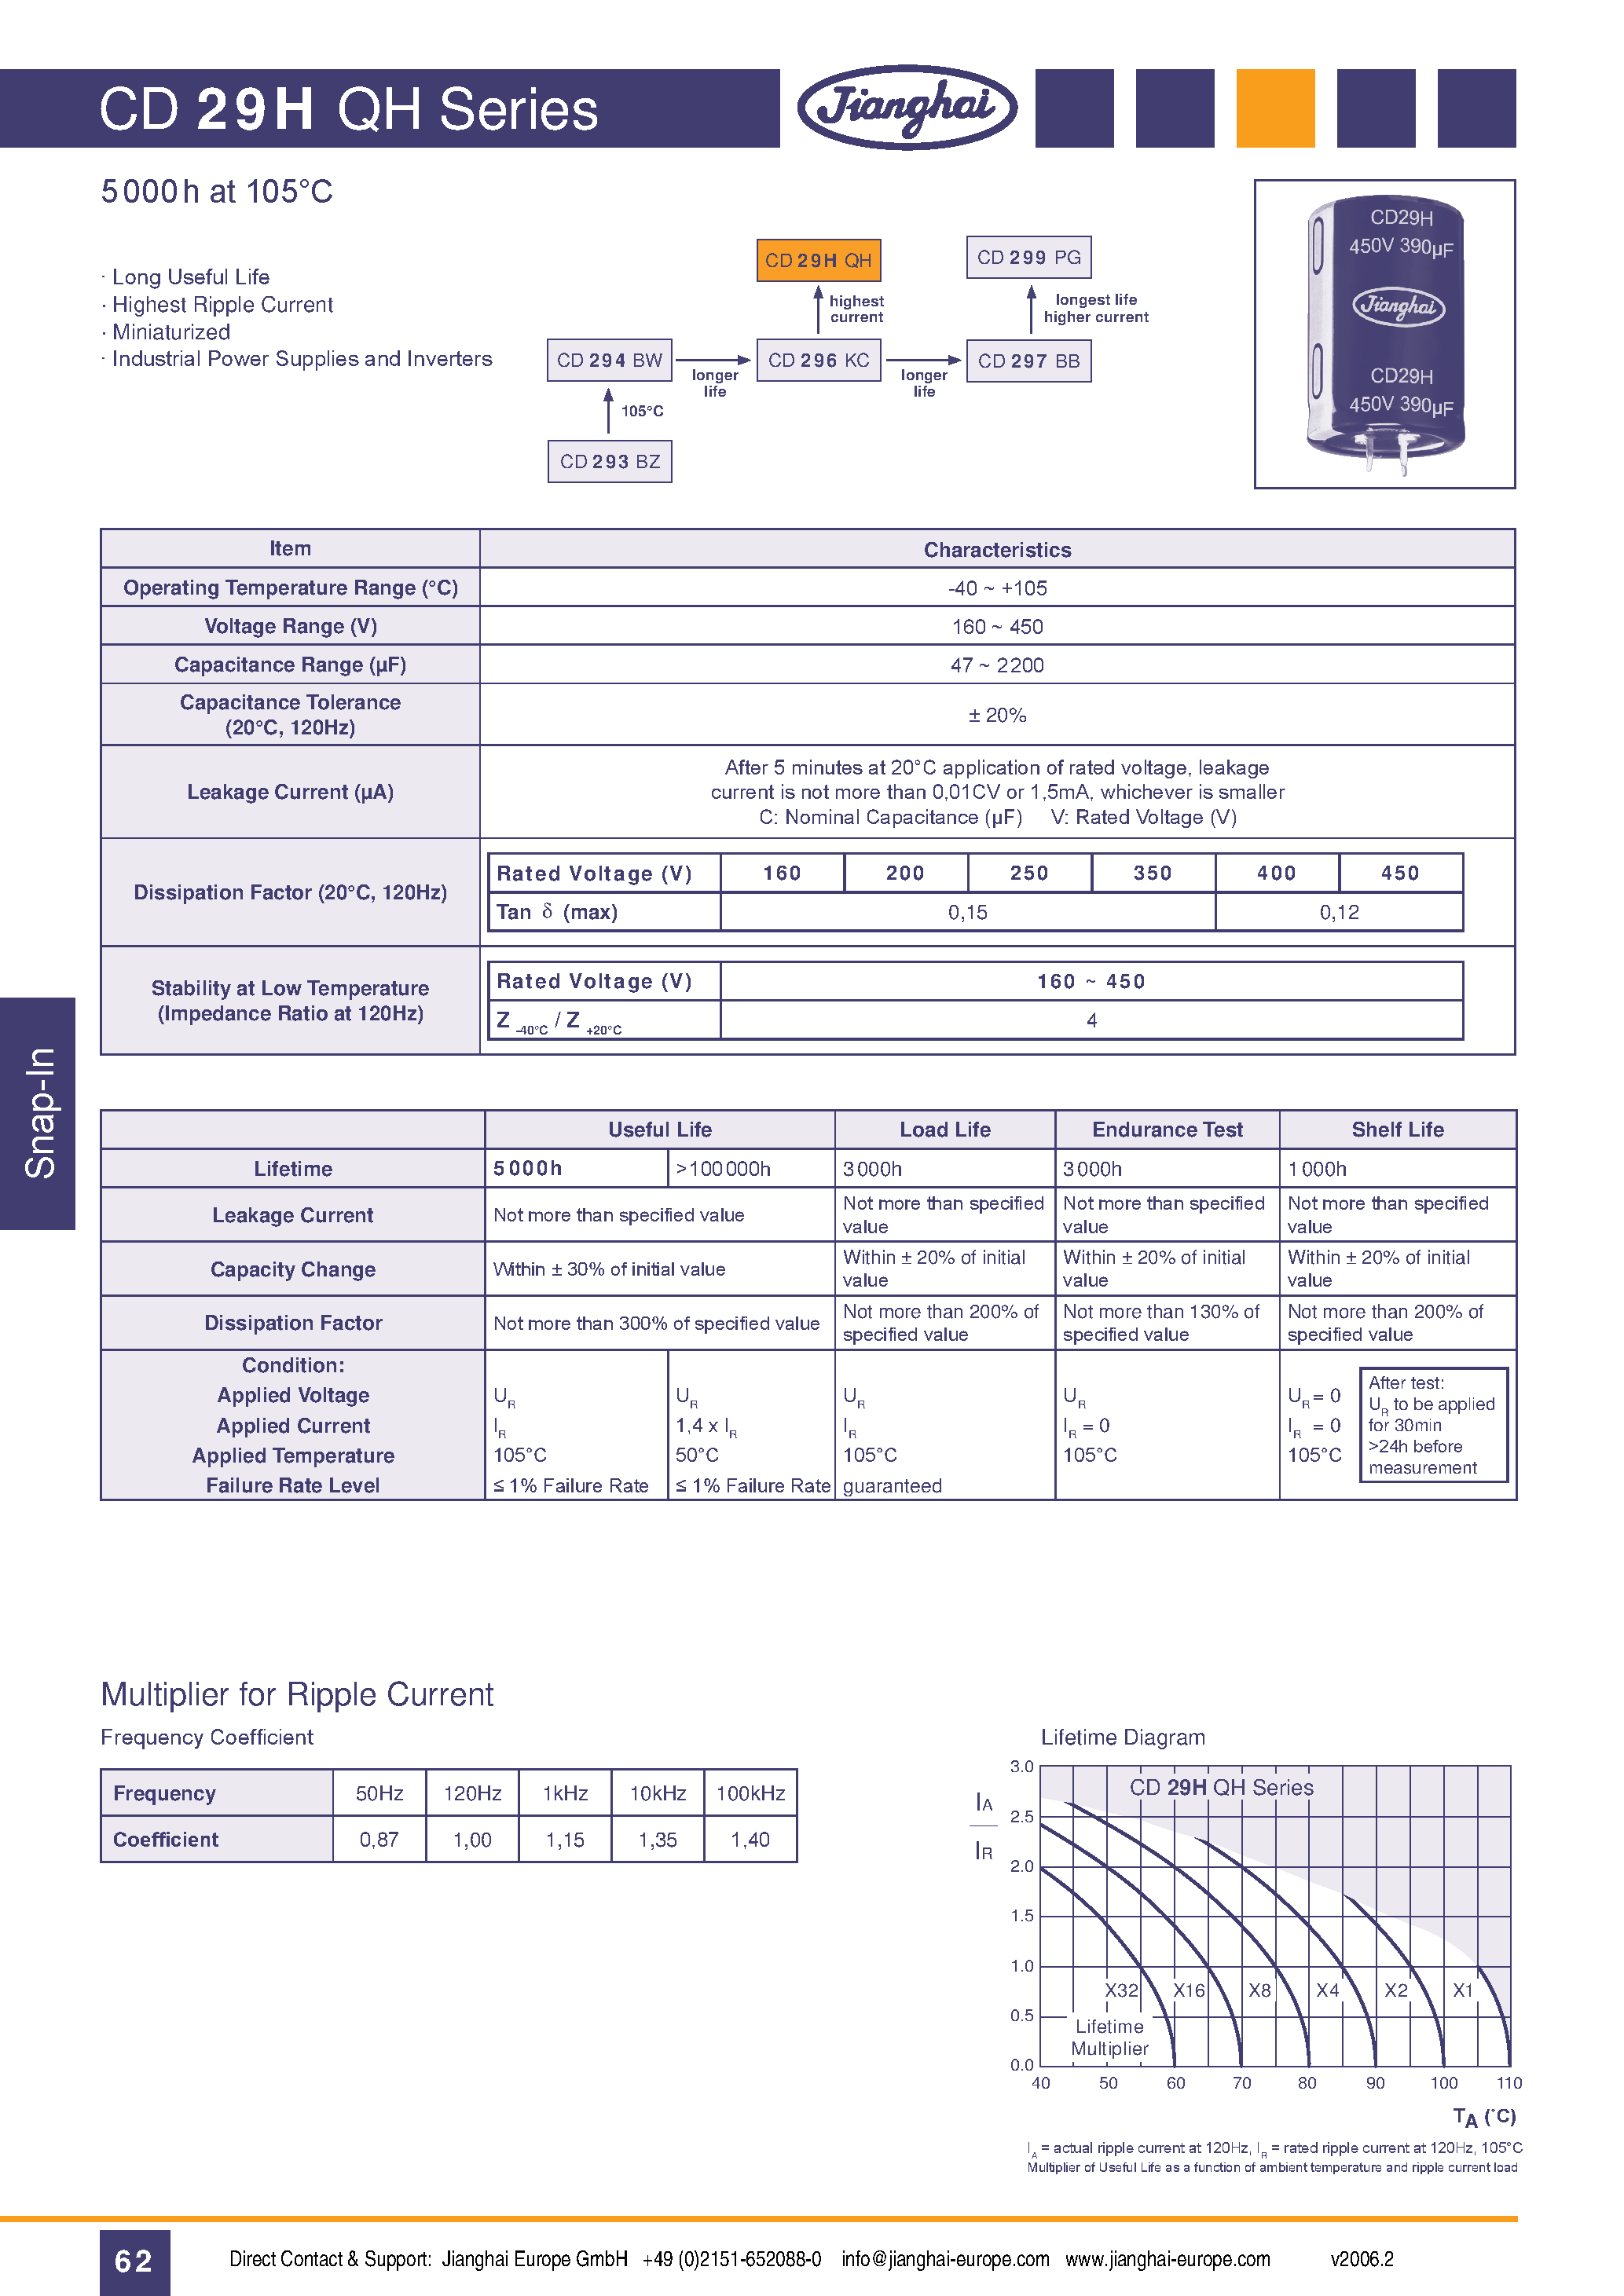 Datasheet CD29HQH - Long Useful Life Highest Ripple Current Miniaturized Industrial Power Supplies and Inverters page 1